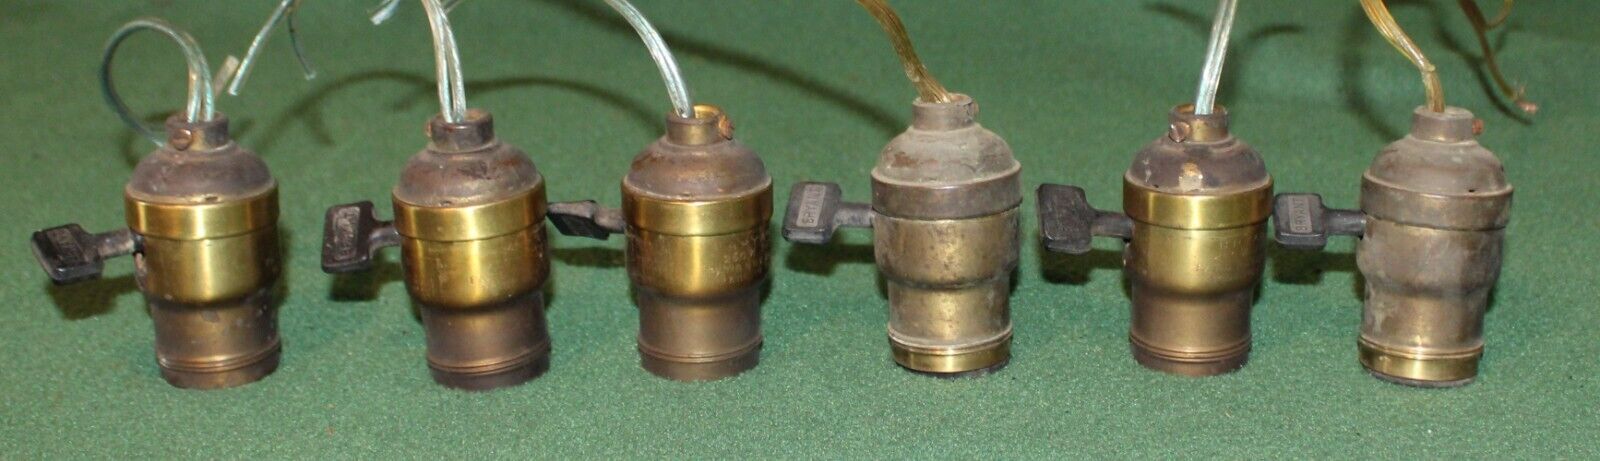 6 ANTIQUE BRYANT FAT BOY PADDLE SWITCHES & SOCKETS (5) PATENTED NOV. 26, 1907